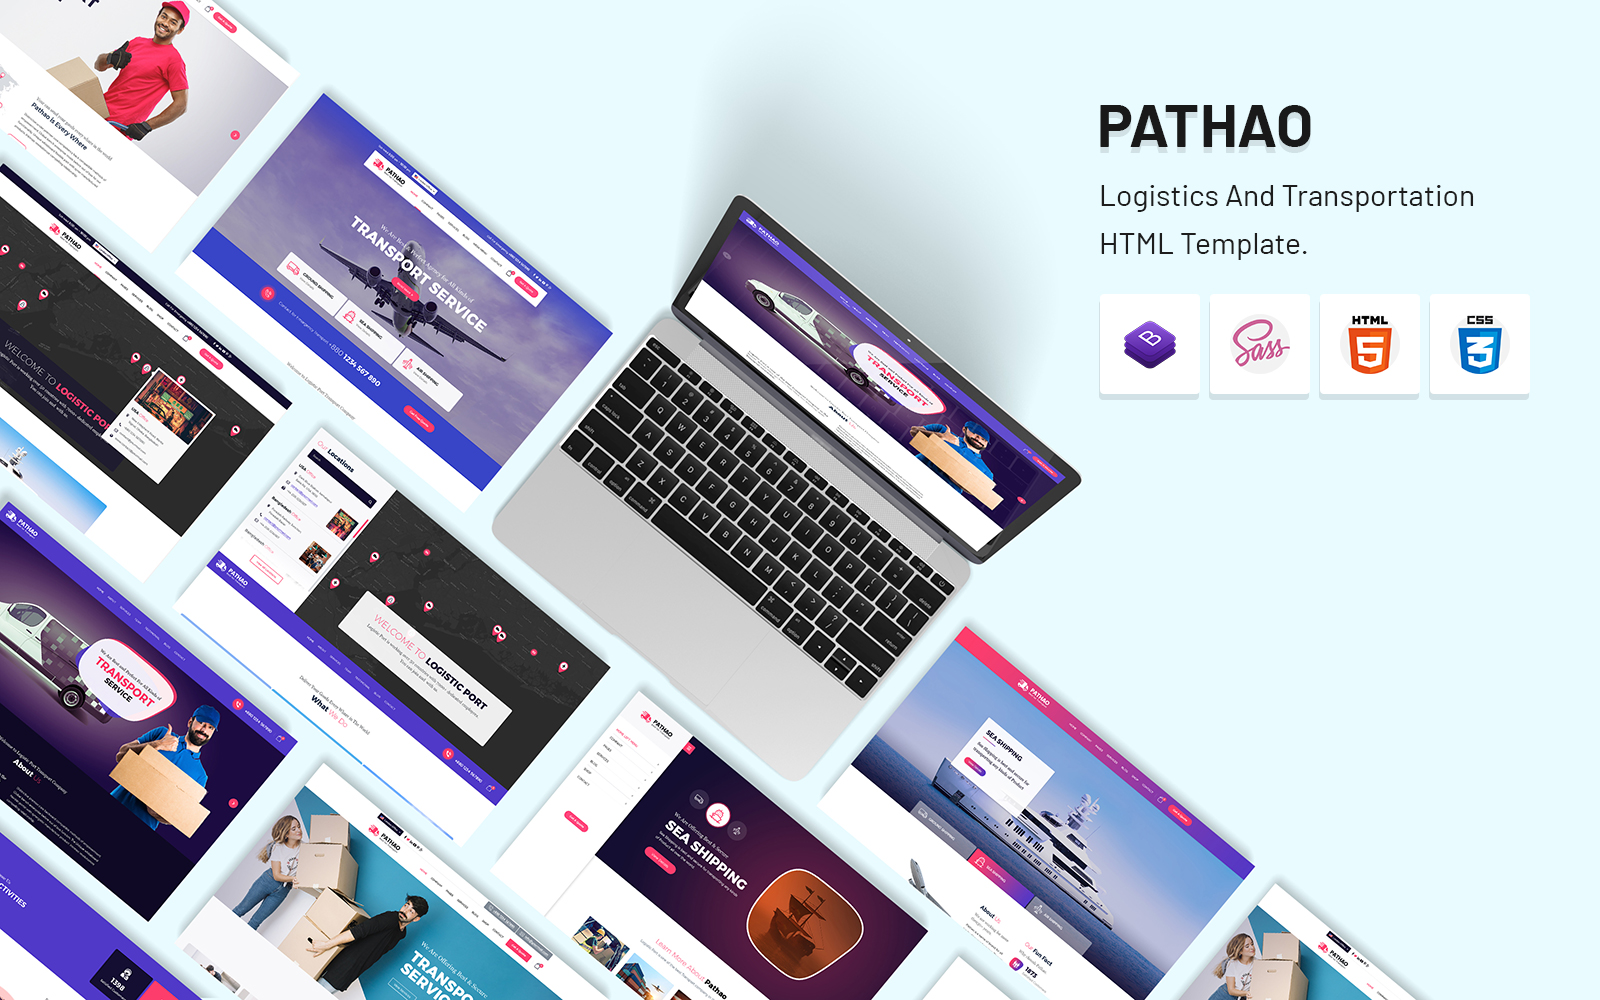 Pathao - Logistics And Transportation HTML Template.